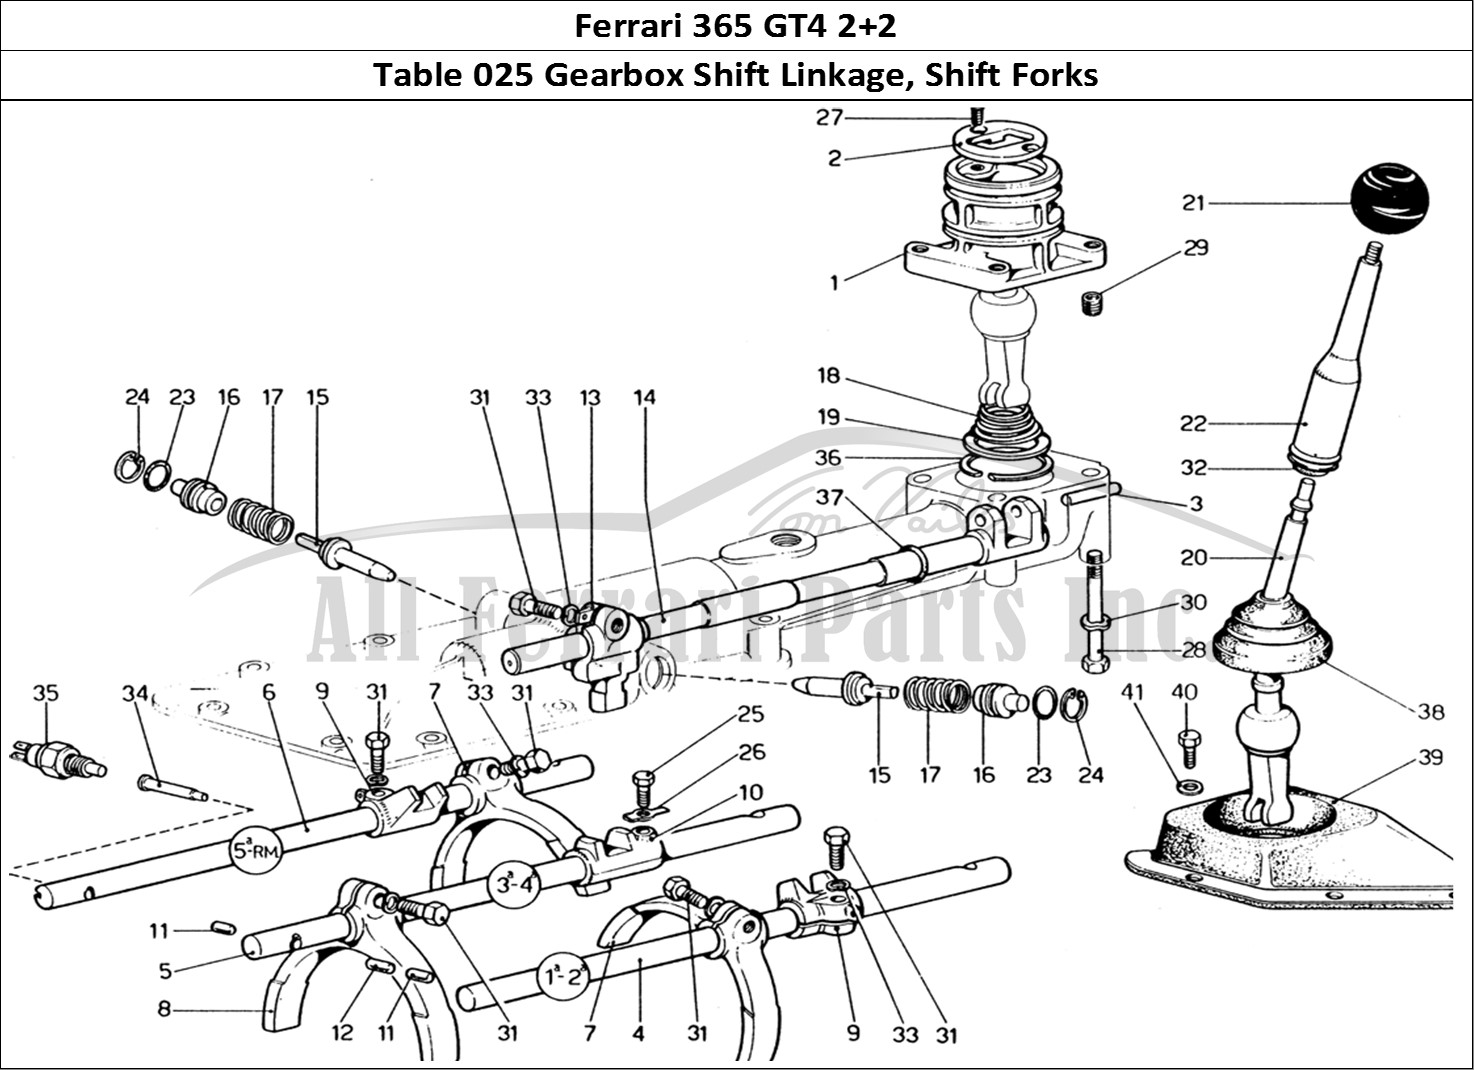 Ferrari Parts Ferrari 365 GT4 2+2 (1973) Page 025 Gearbox Outer and Inner C